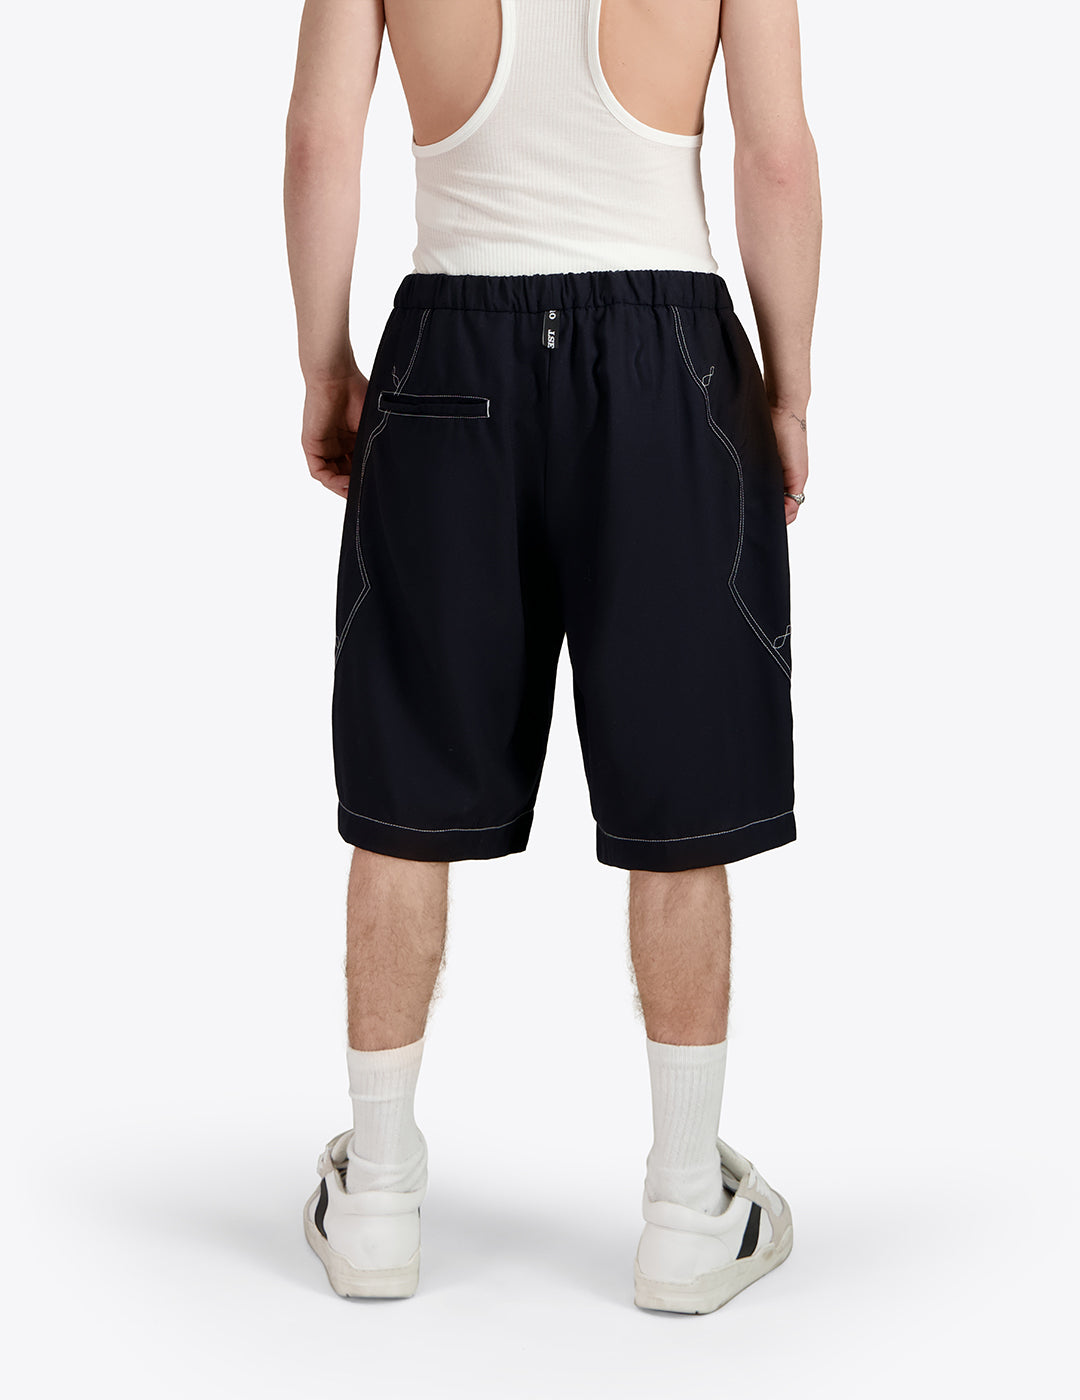 THE WESTERN CLIMBING SHORTS IN NAVY